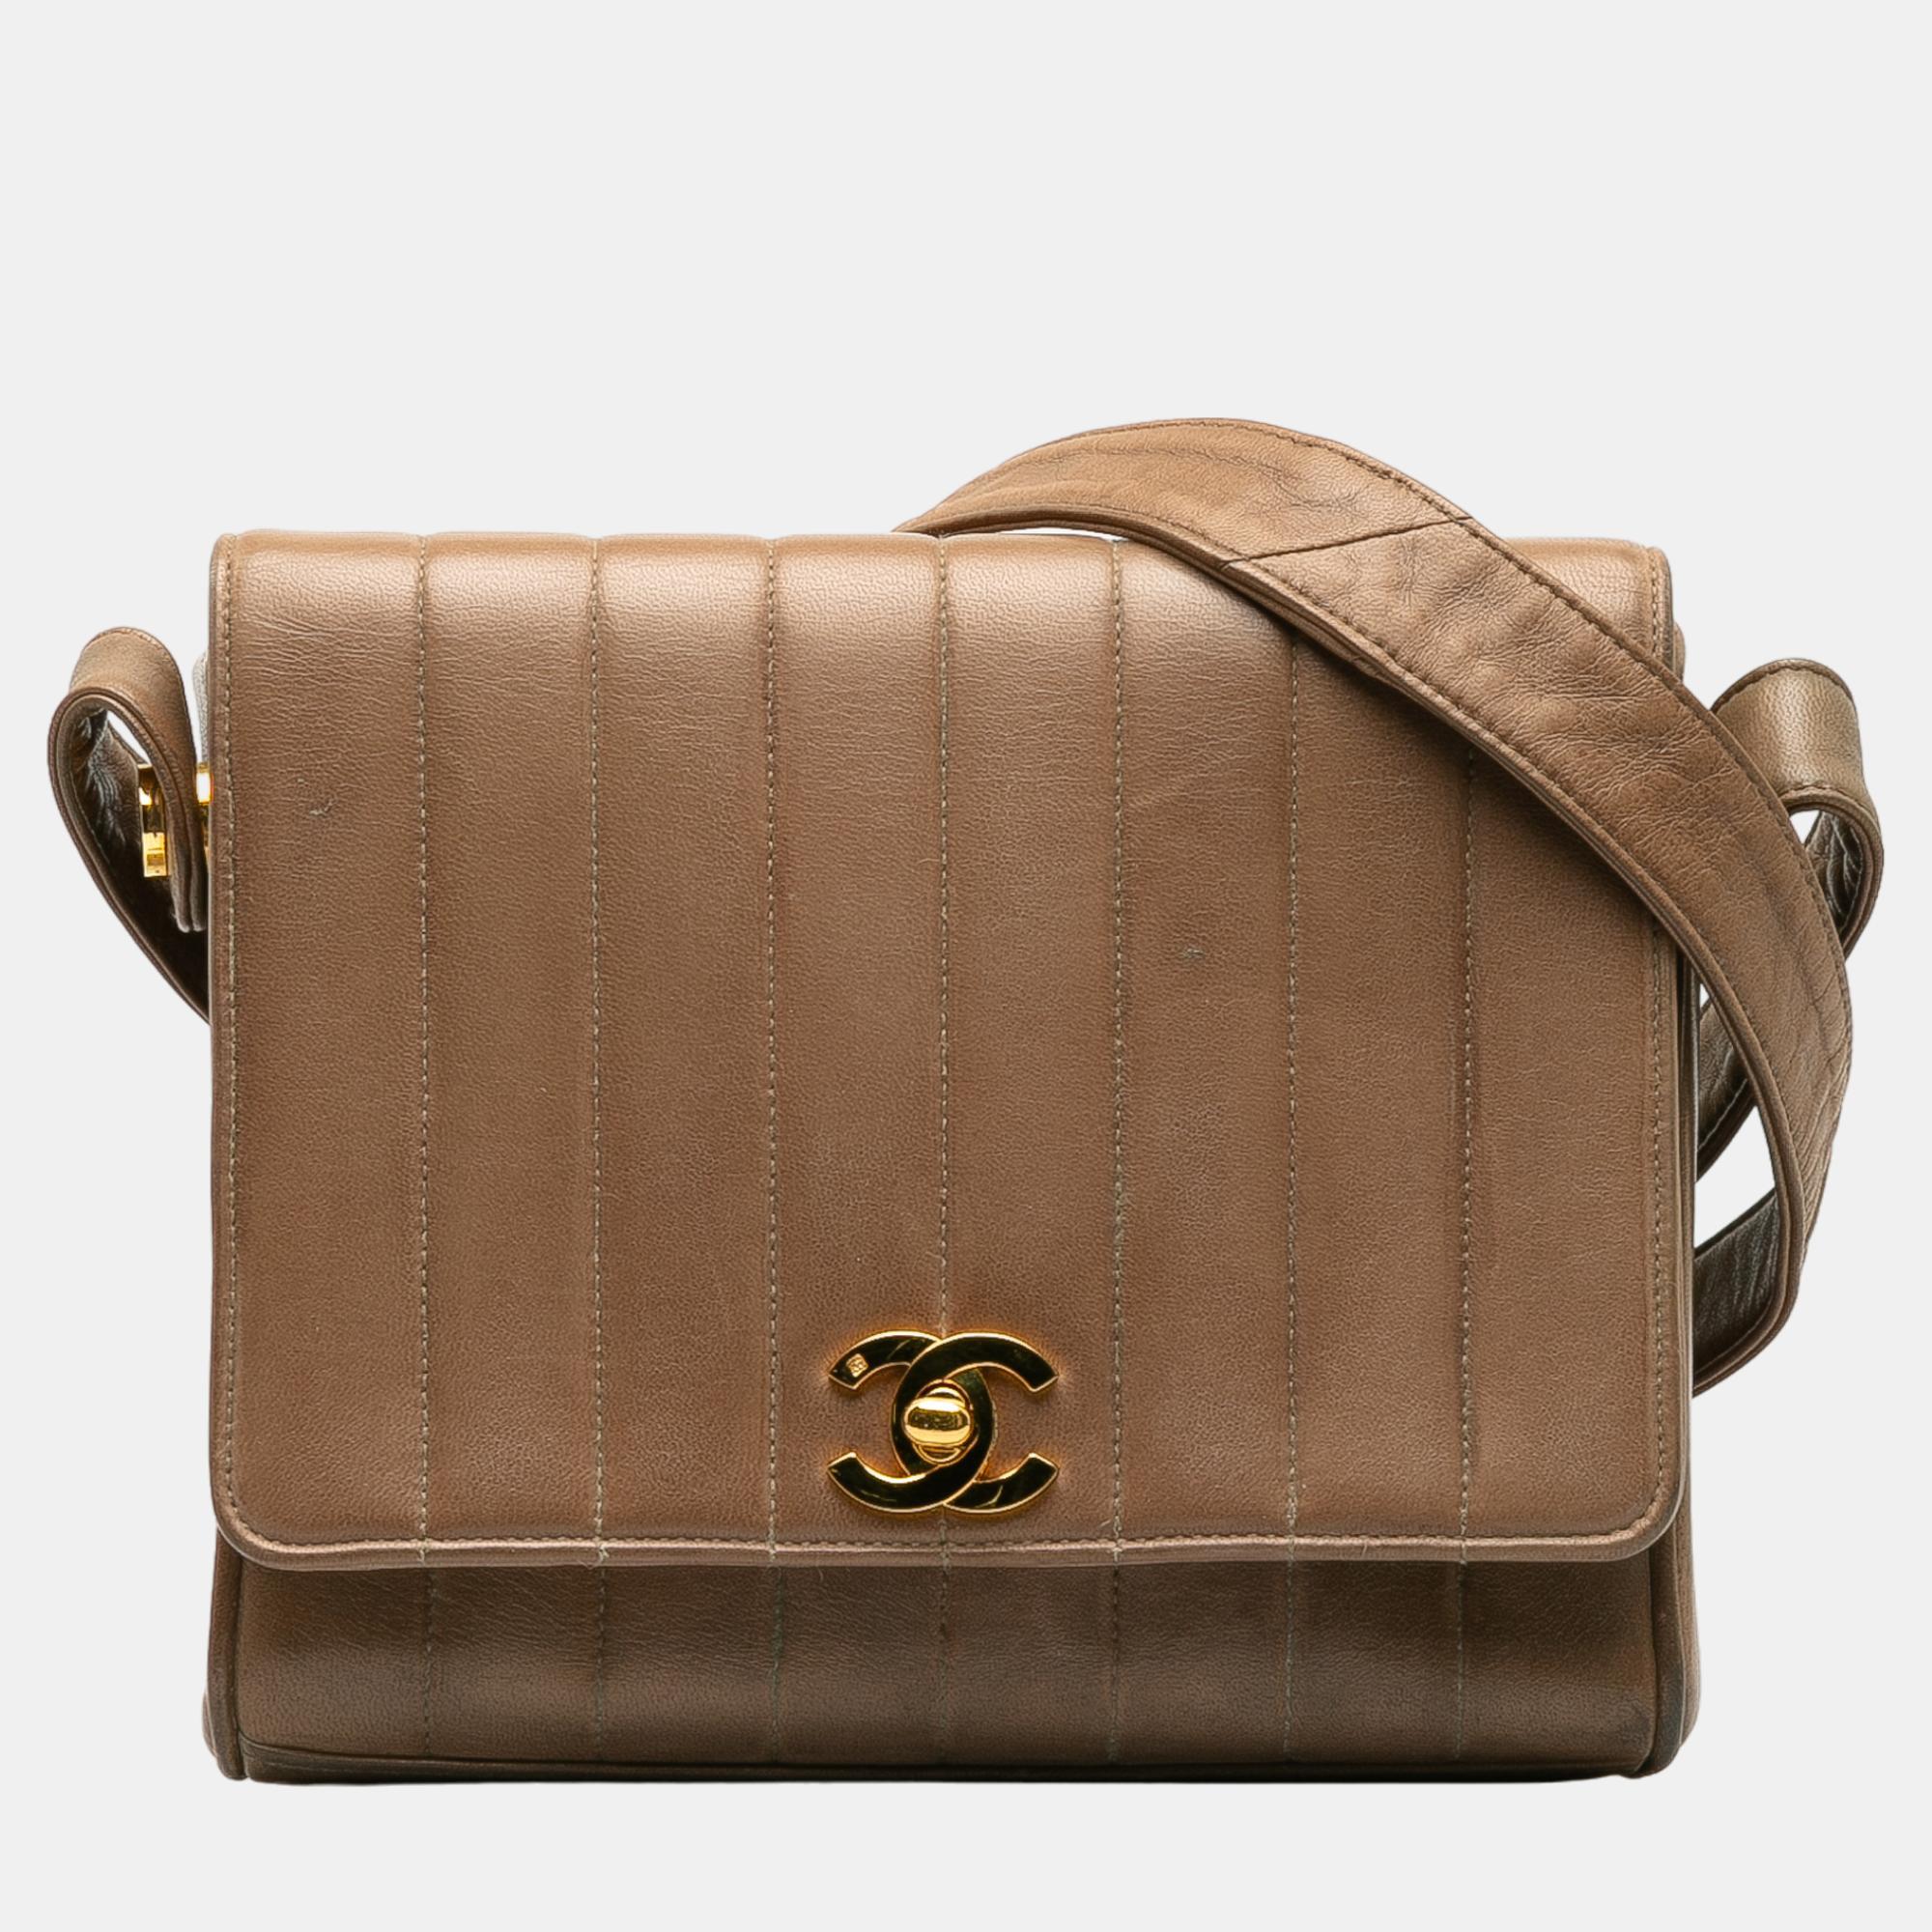 Chanel brown quilted lambskin mademoiselle crossbody